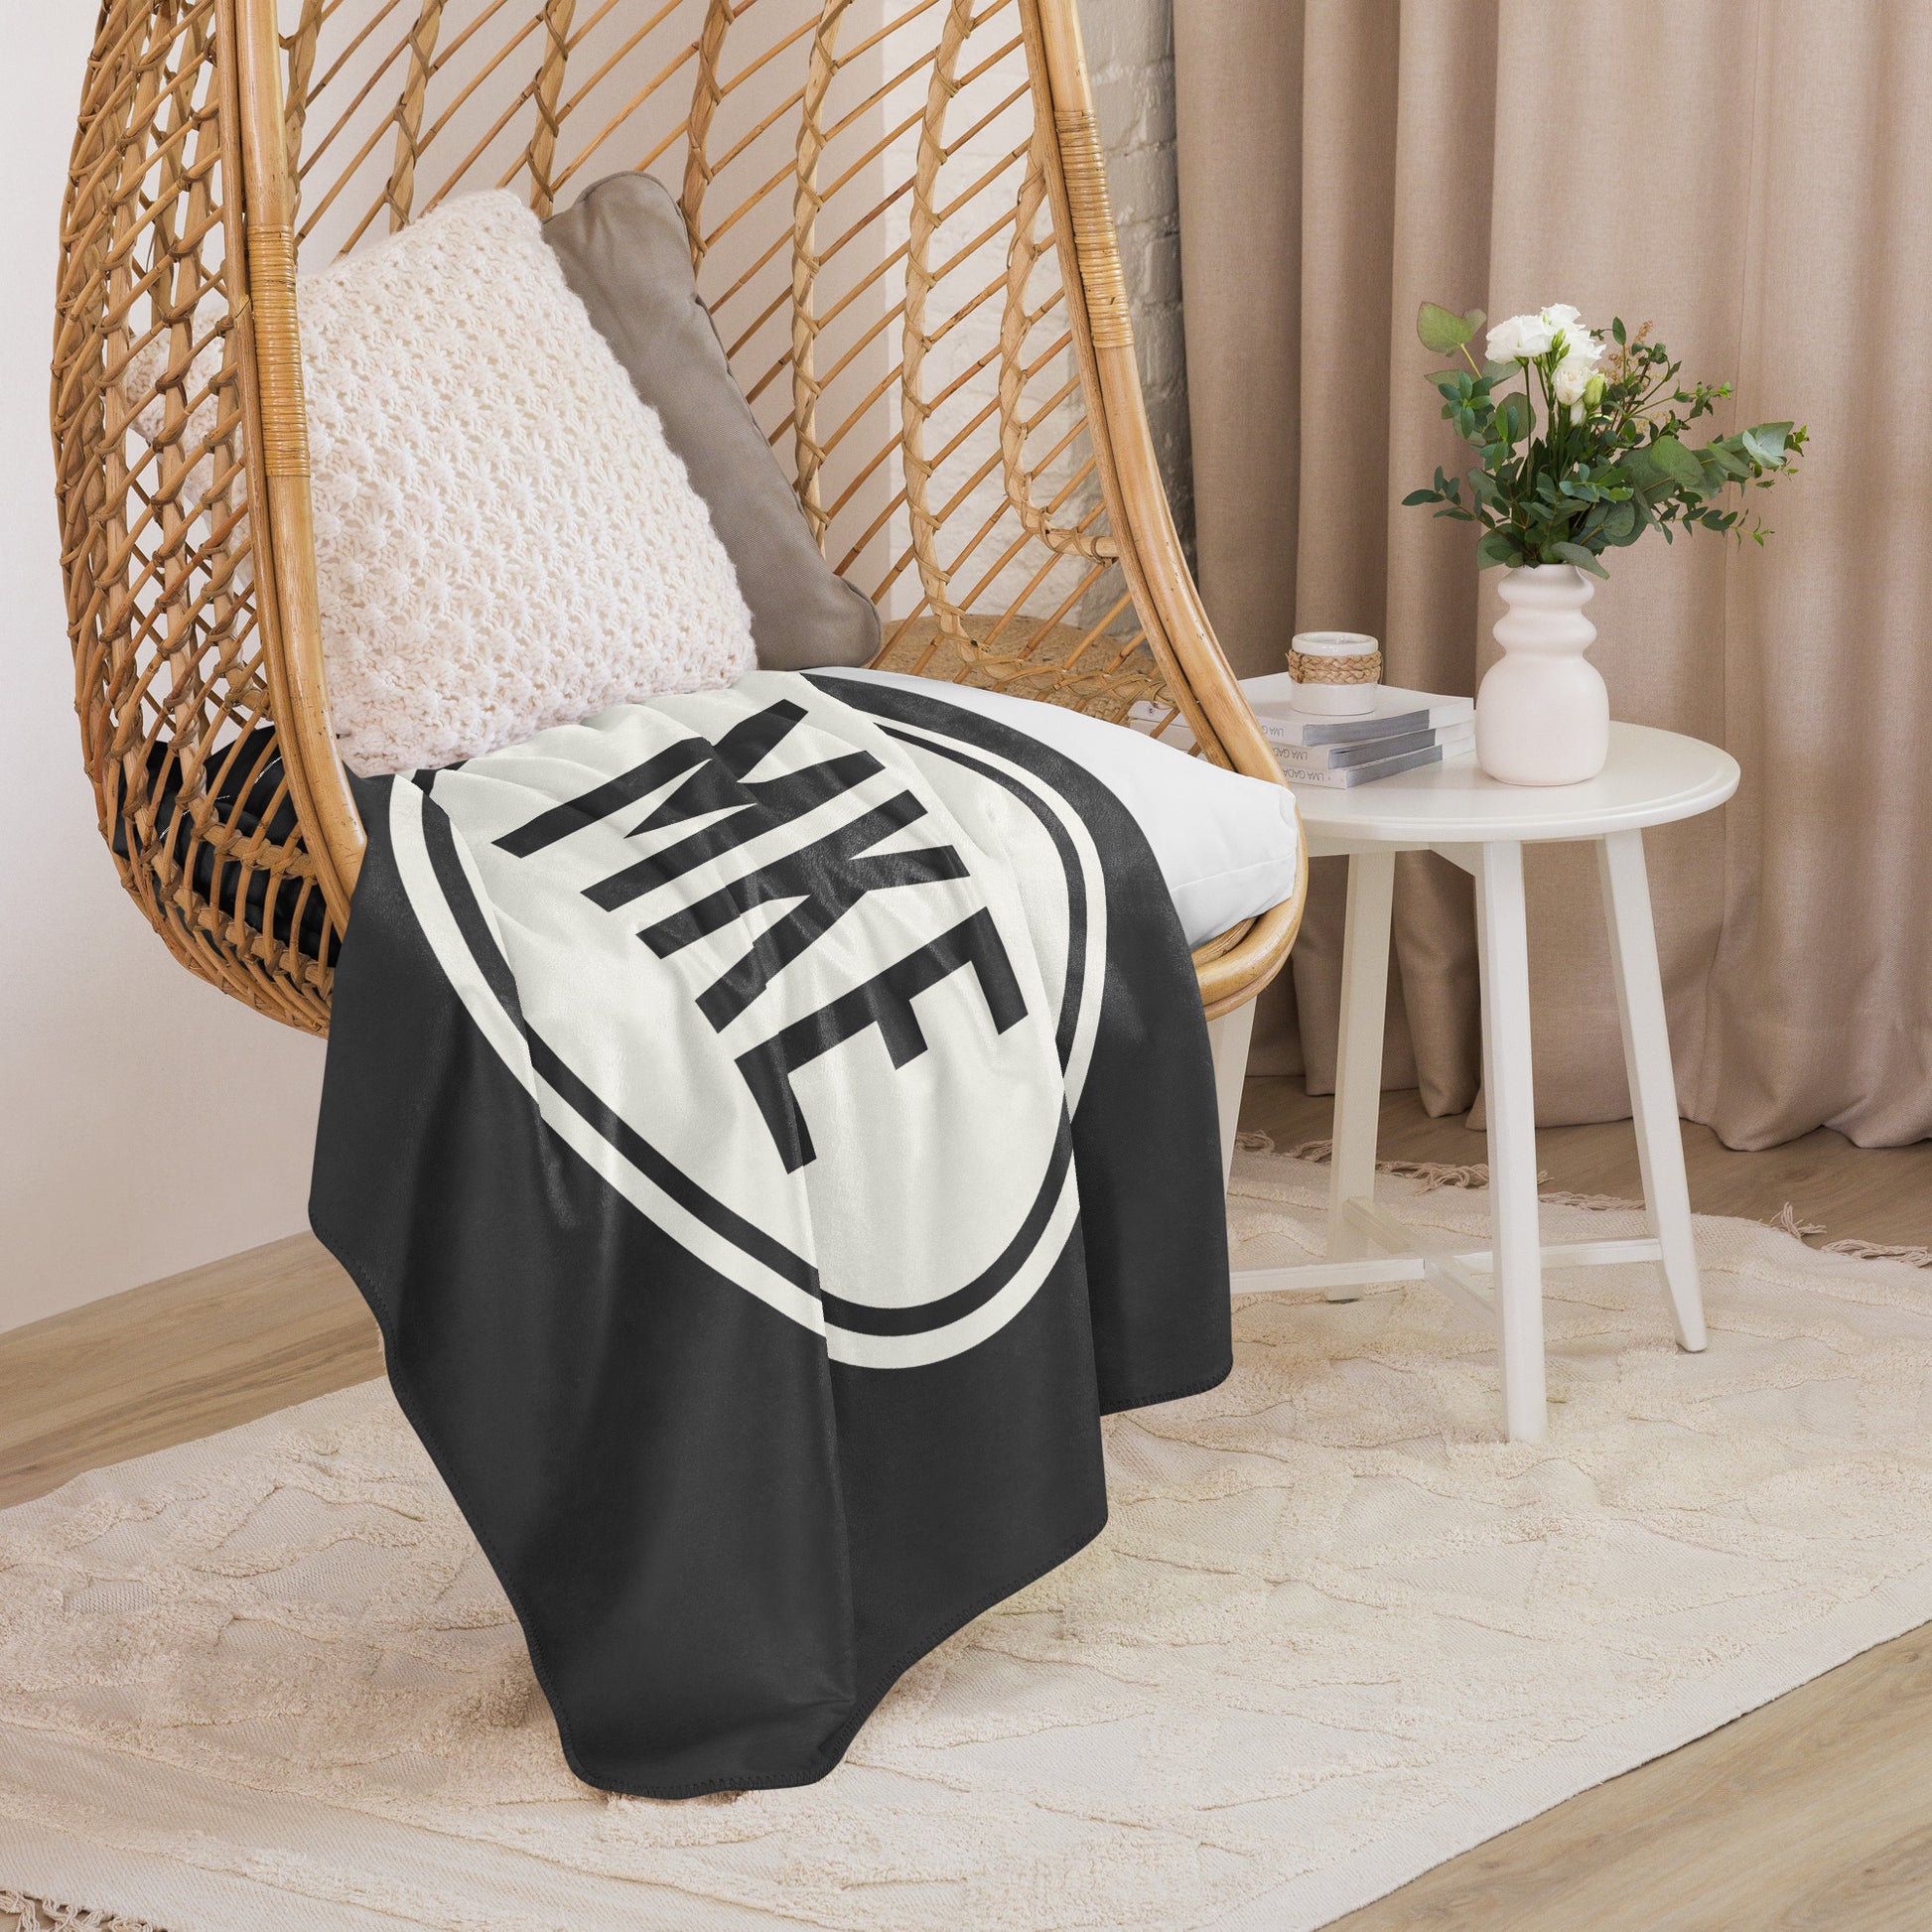 Unique Travel Gift Sherpa Blanket - White Oval • MKE Milwaukee • YHM Designs - Image 06